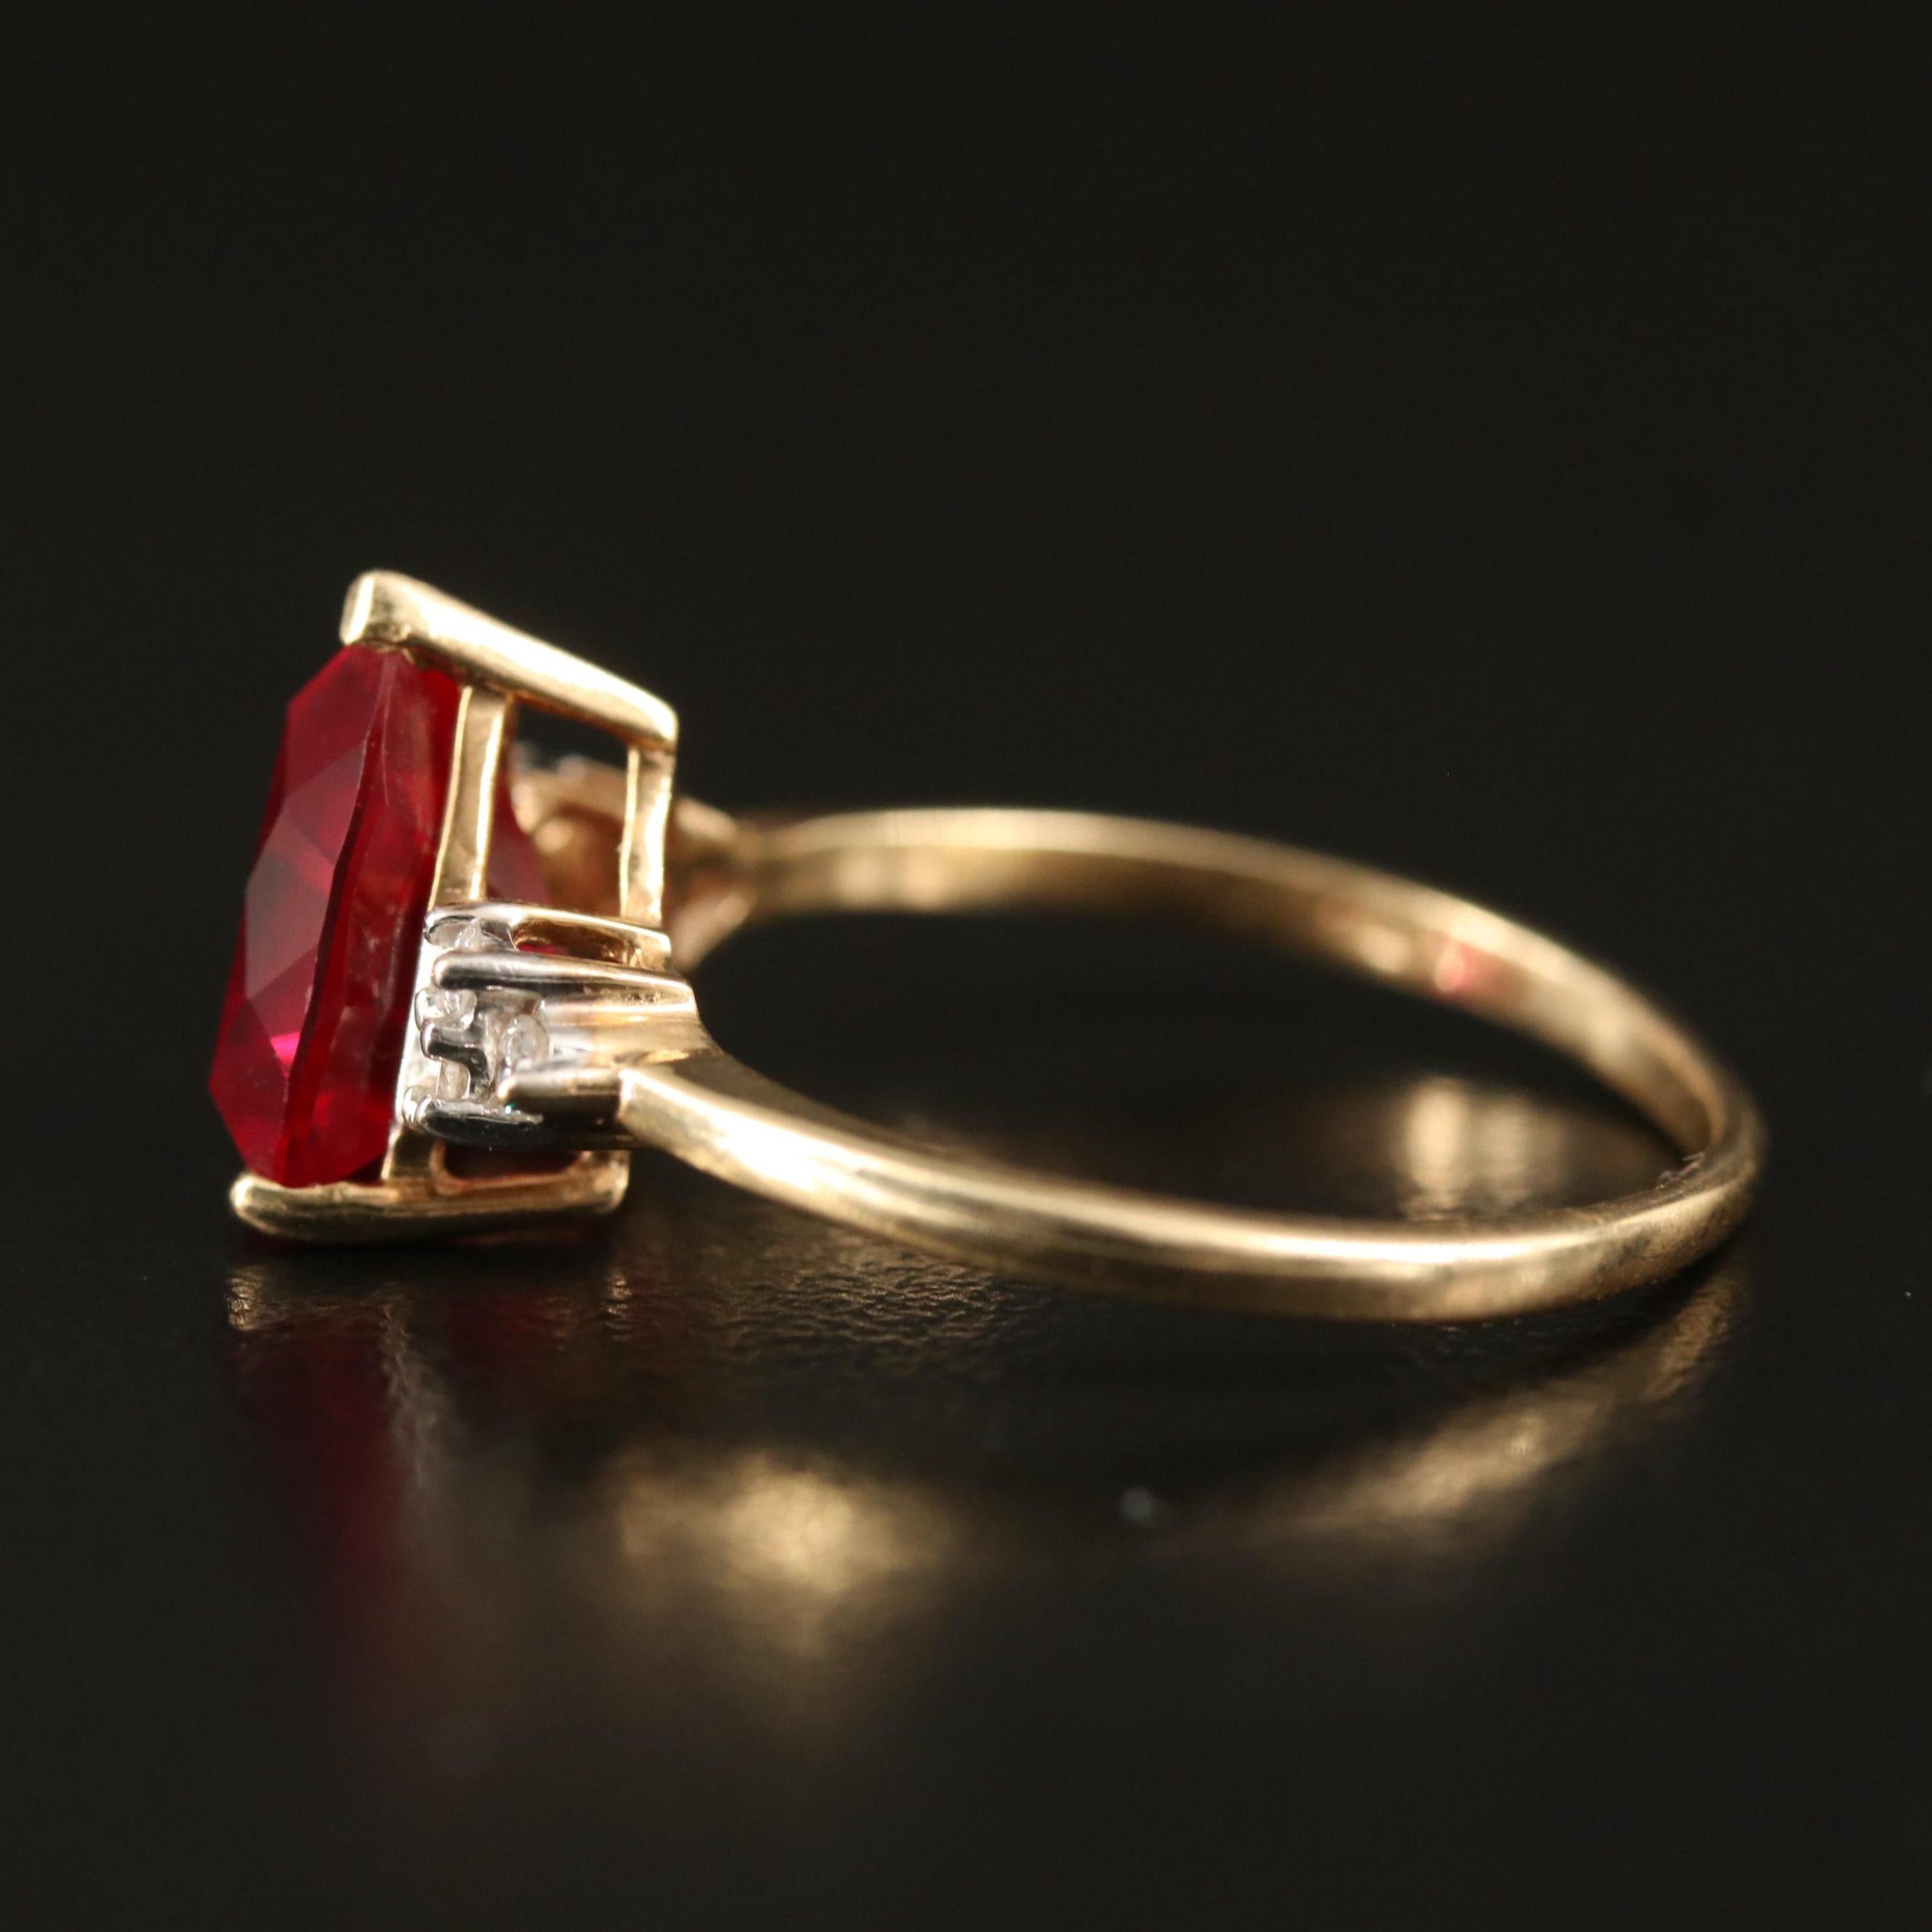 For Sale:  2 Carat Trilliant Cut Ruby Diamond Engagement Ring Antique Victorian Ruby Ring 5